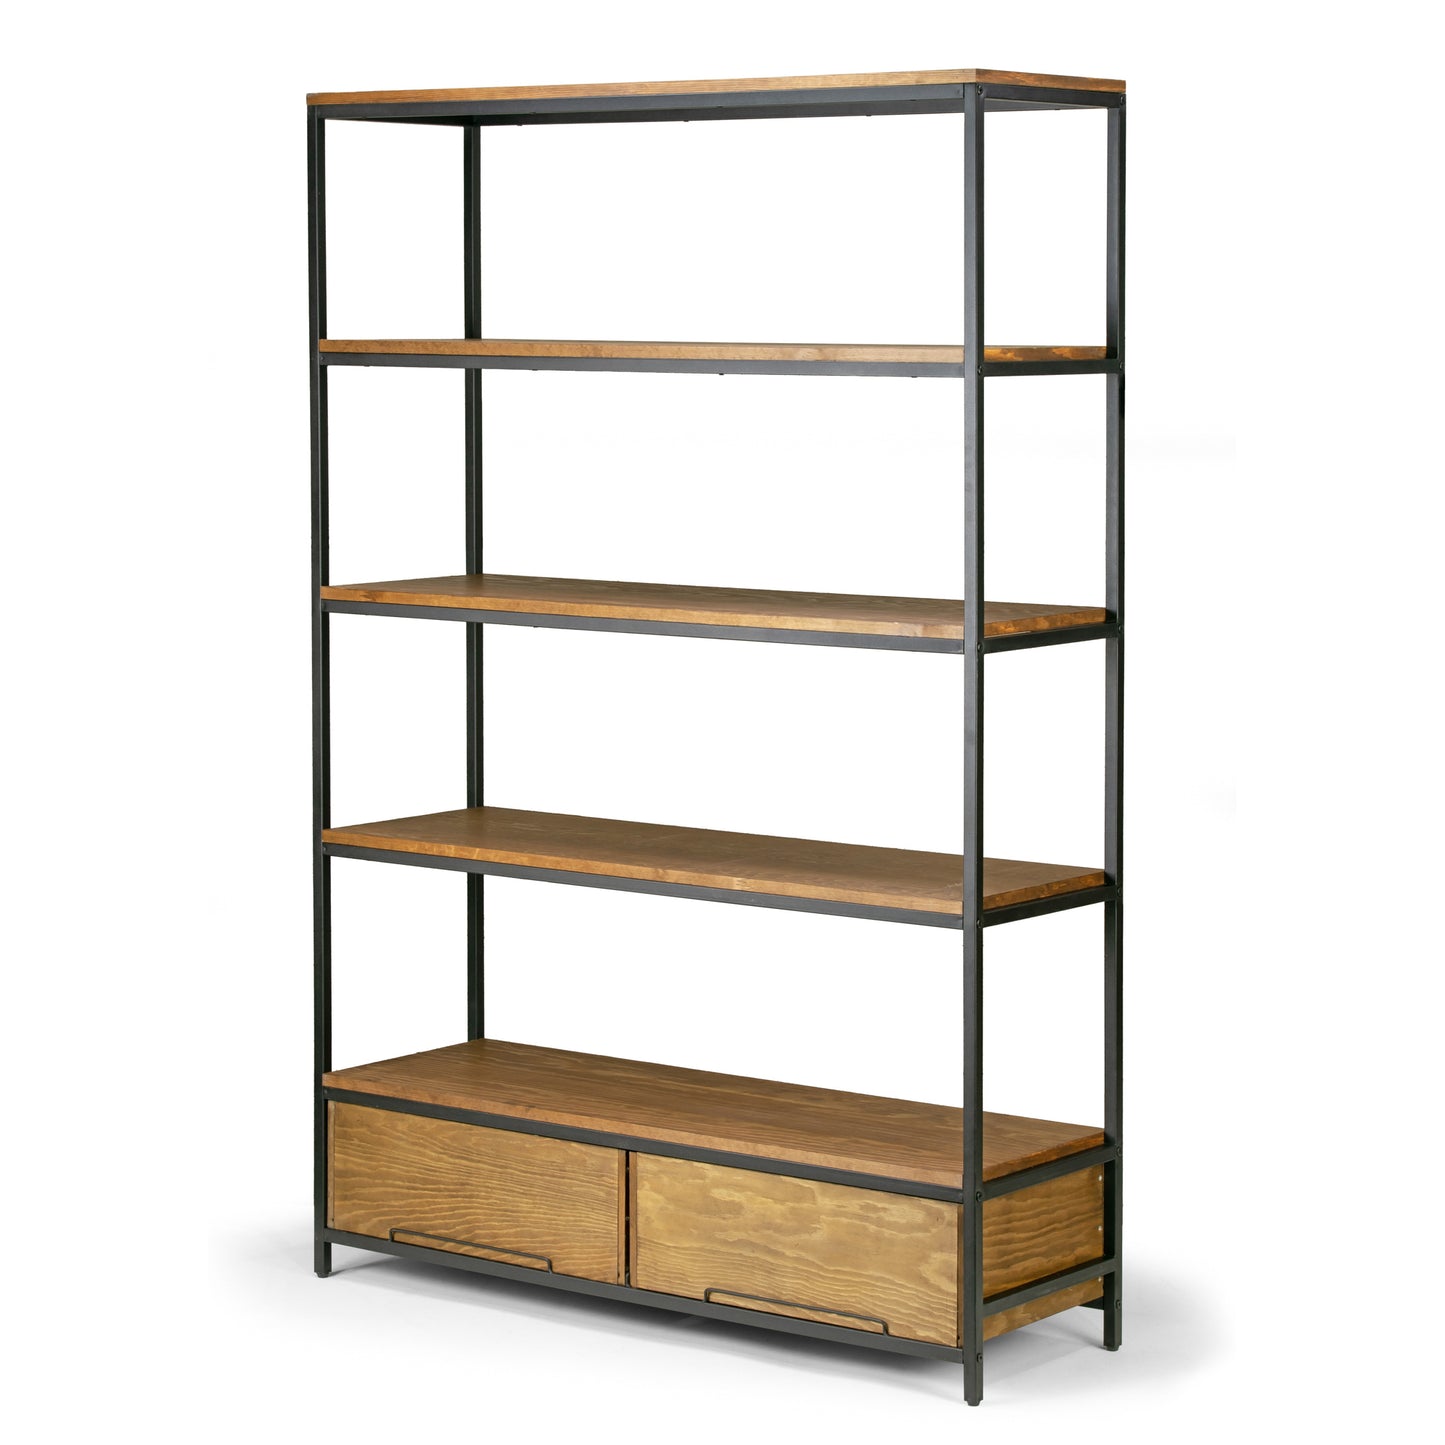 Alta Brown Pine Wood Display Shelf Etagere Metal Frame Bookcase with Drawers